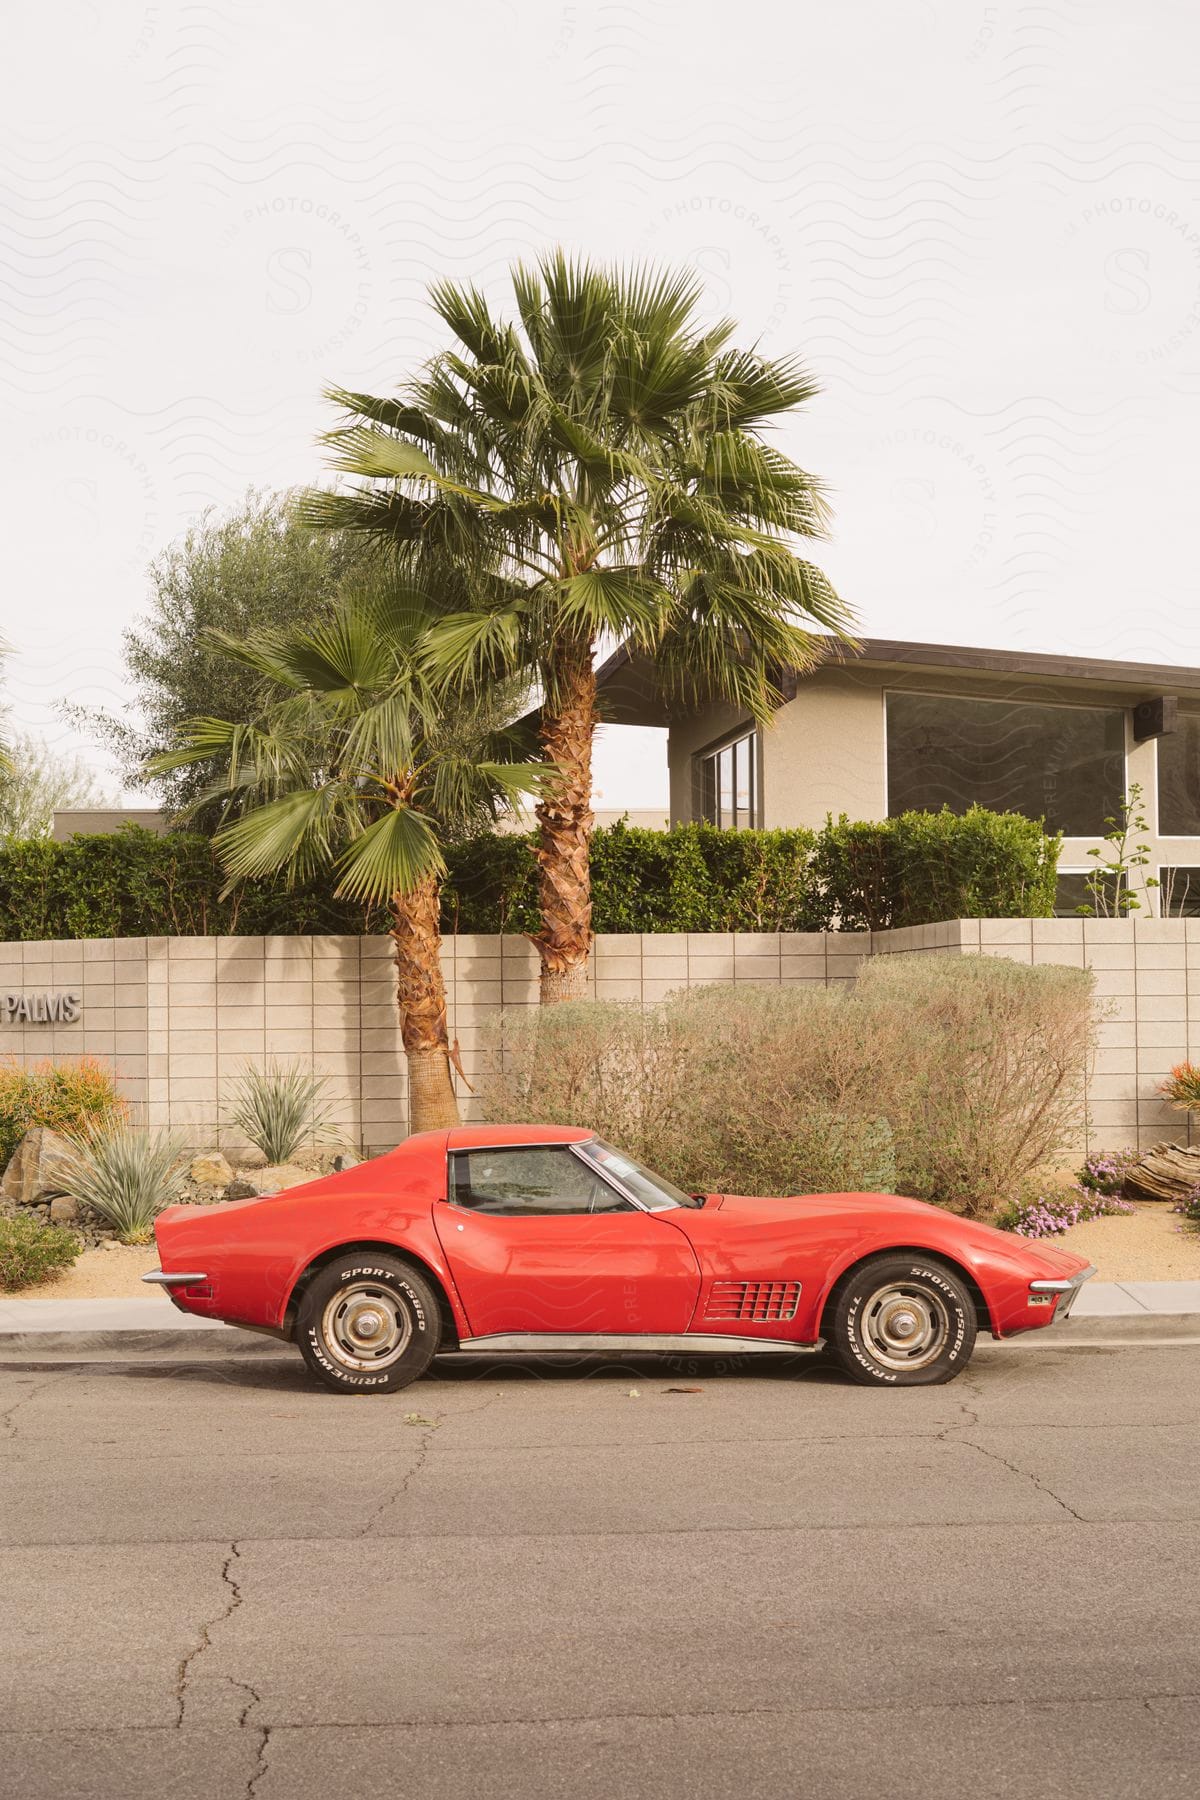 A red sports car parked on a street in front of a wall with the word palms on it with two palm trees and some bushes